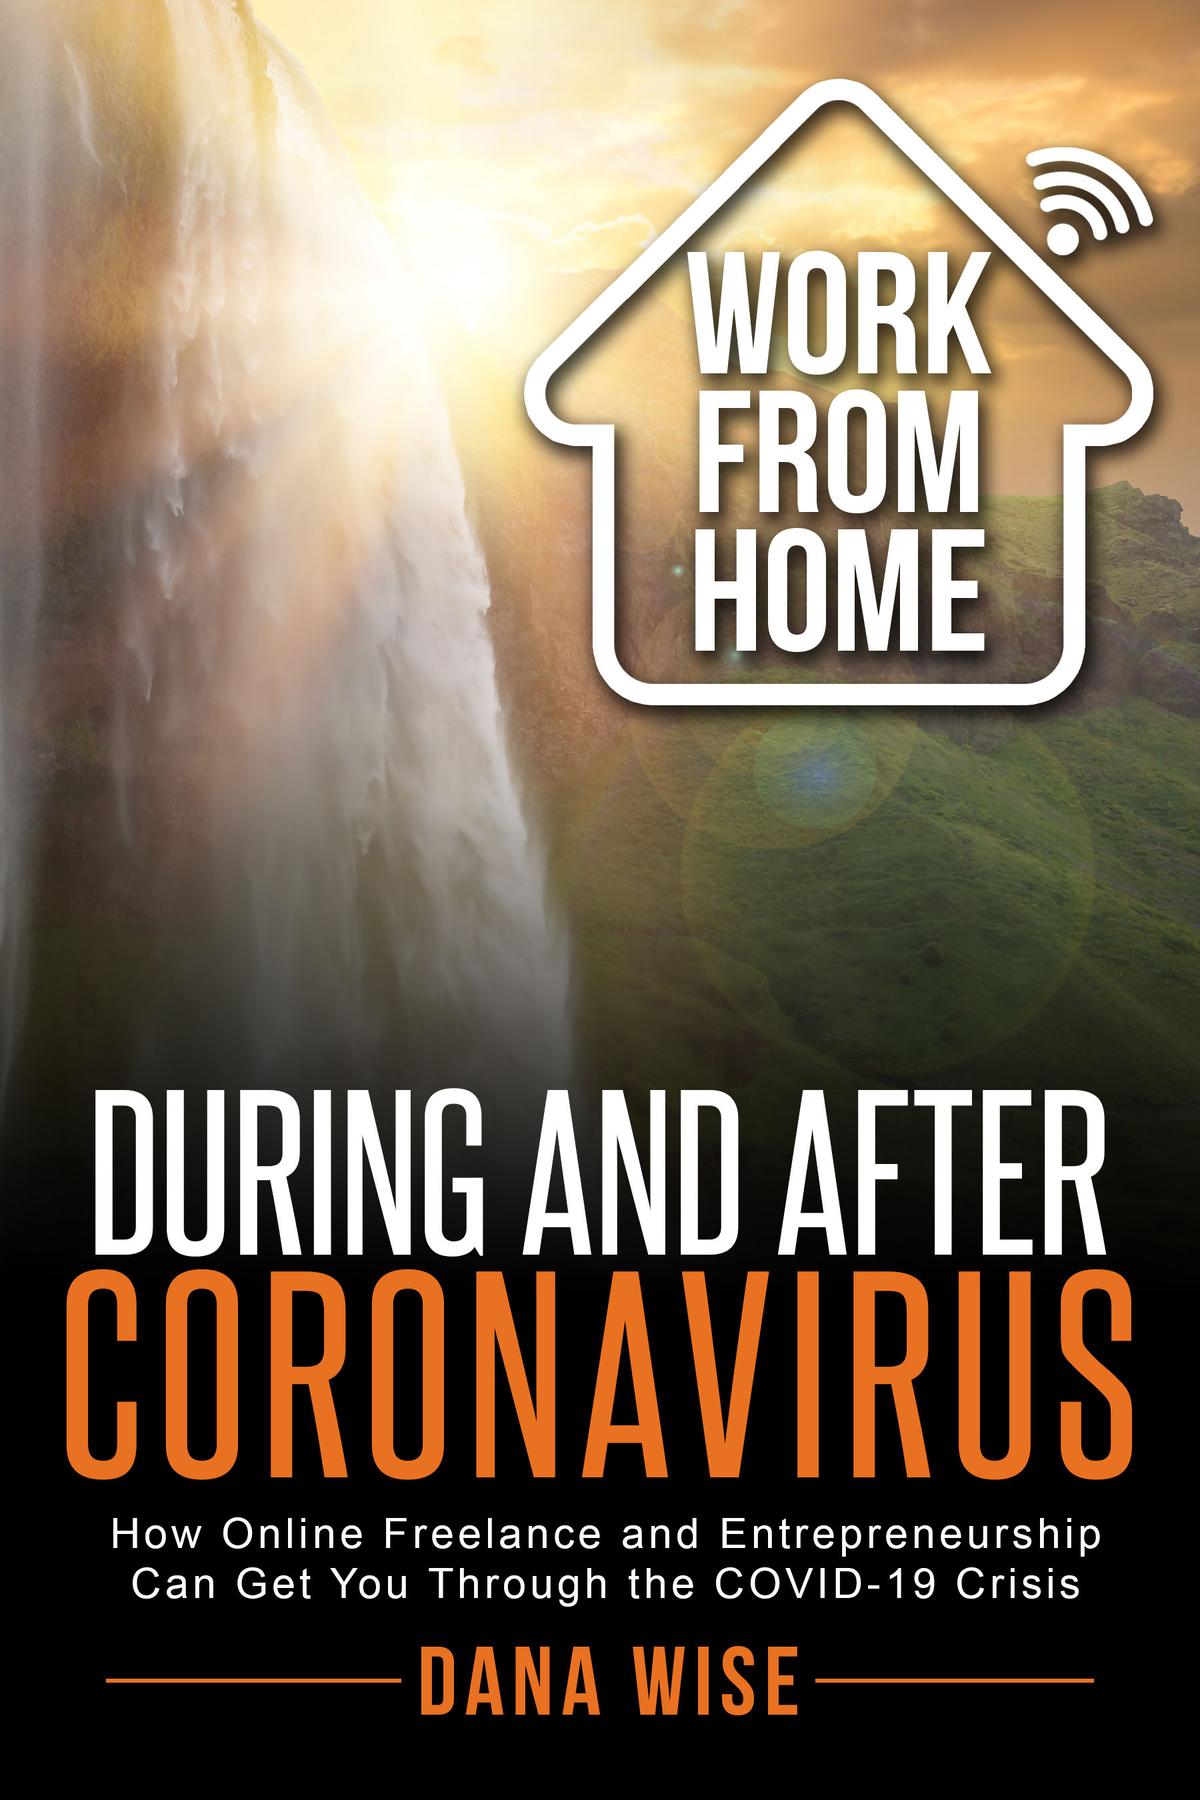 Work from Home During and After Coronavirus